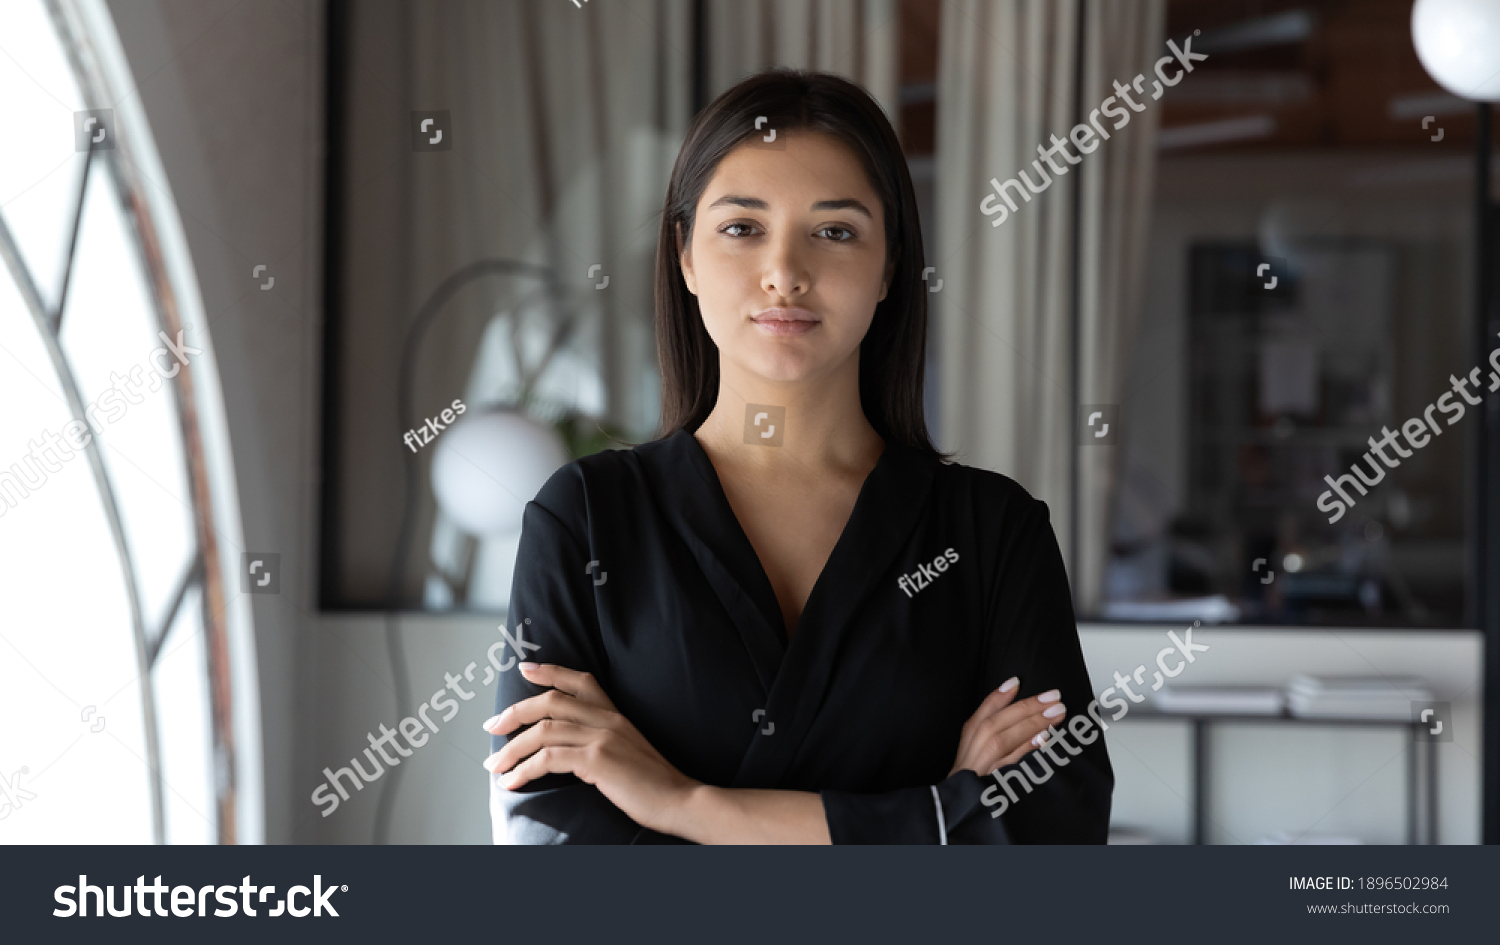 Head shot portrait confident Indian businesswoman hr manager standing in modern office with arms crossed, serious entrepreneur team leader mentor posing for corporate photo, looking at camera #1896502984